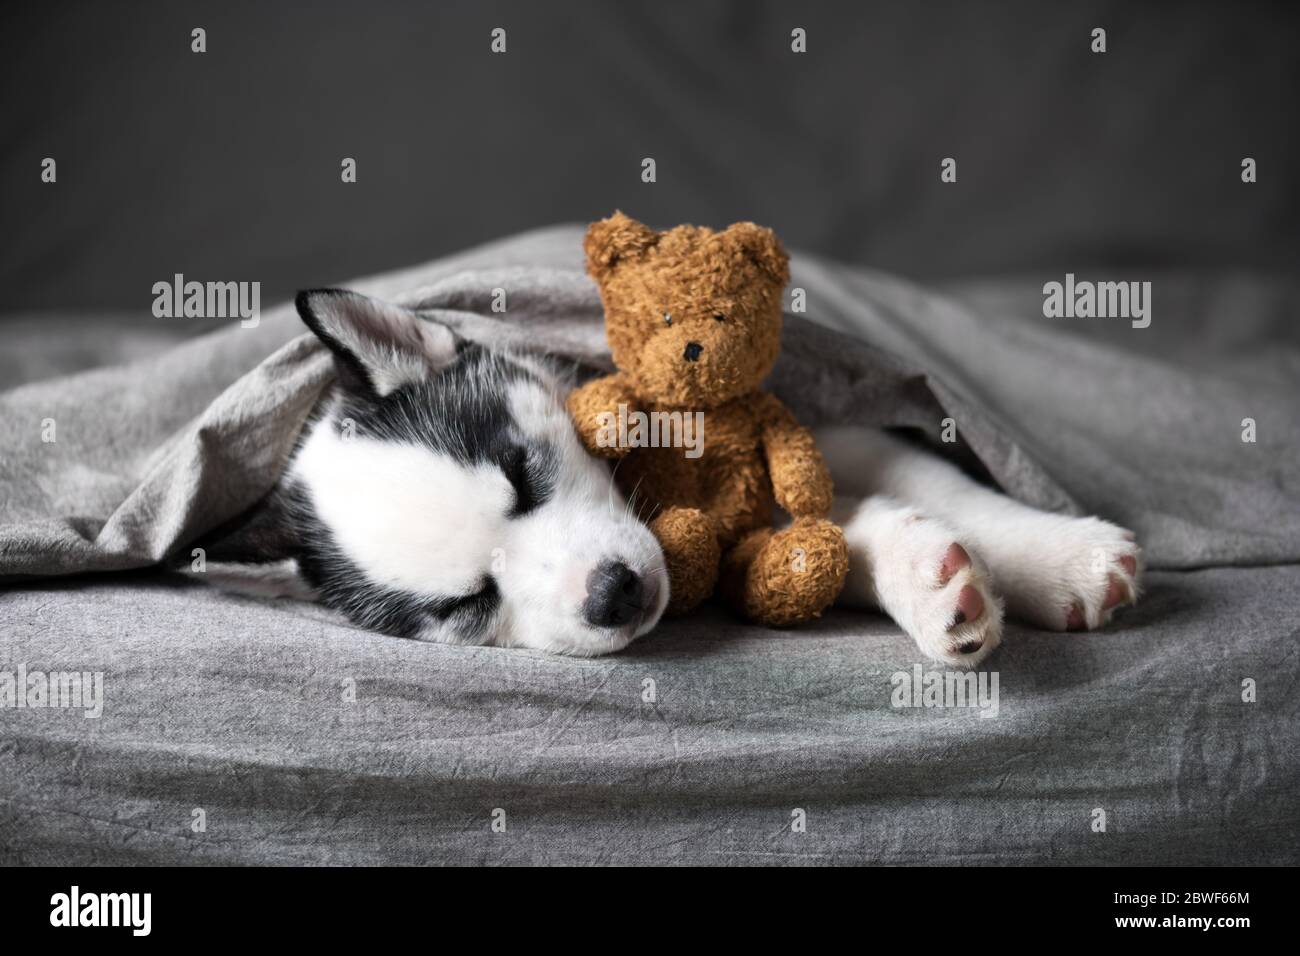 A small white dog puppy breed siberian husky with beautiful blue eyes lays on grey carpet with bear toy. Dogs and pet photography Stock Photo